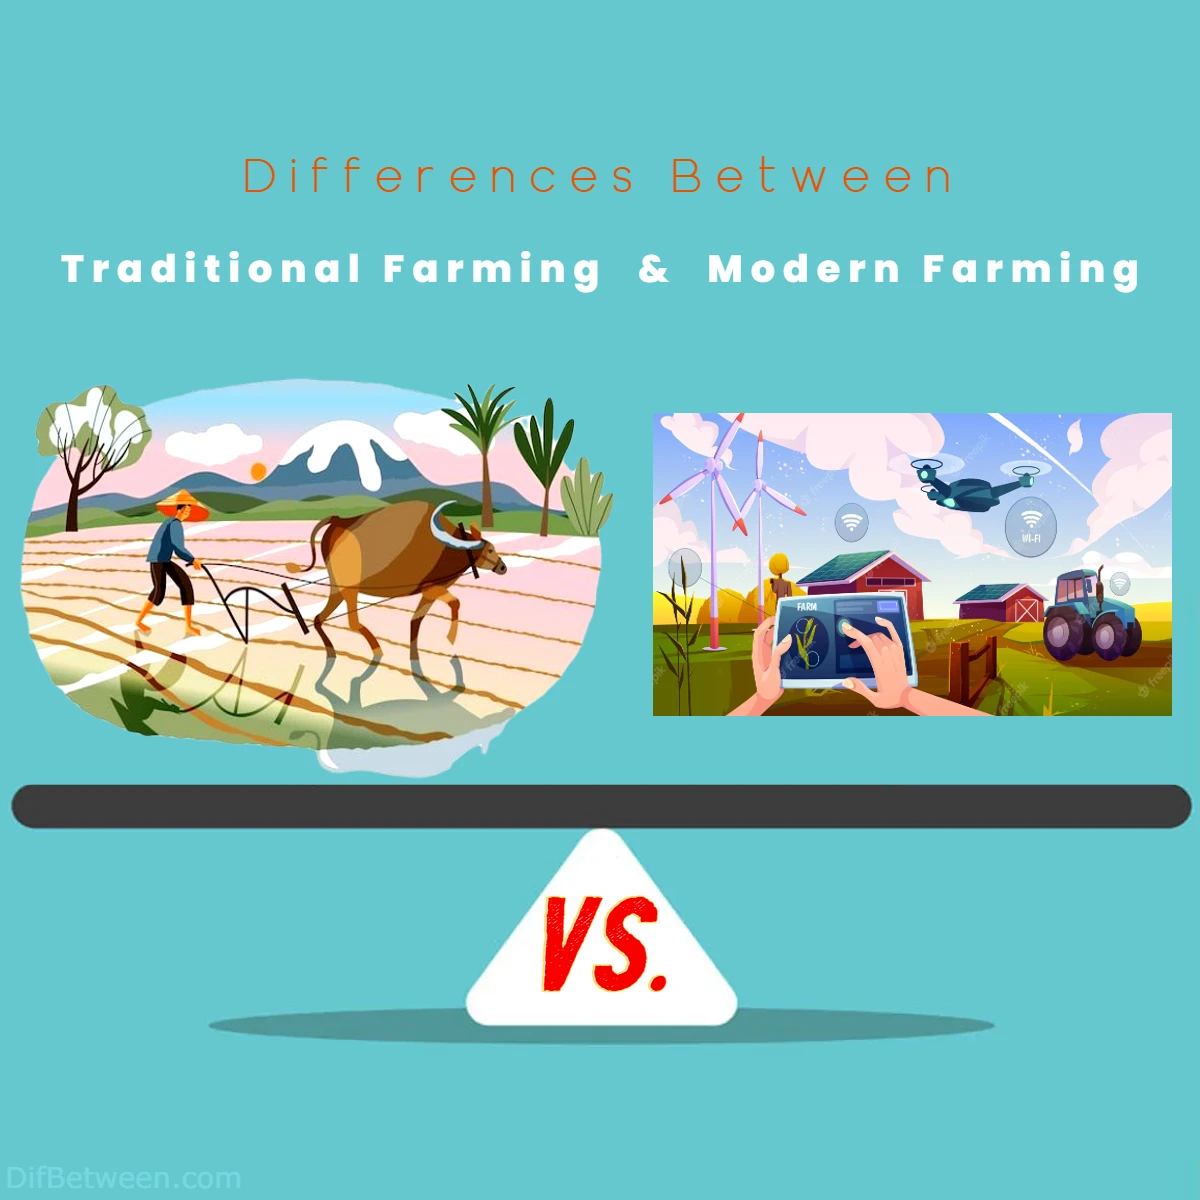 Differences Between Traditional vs Modern Farming